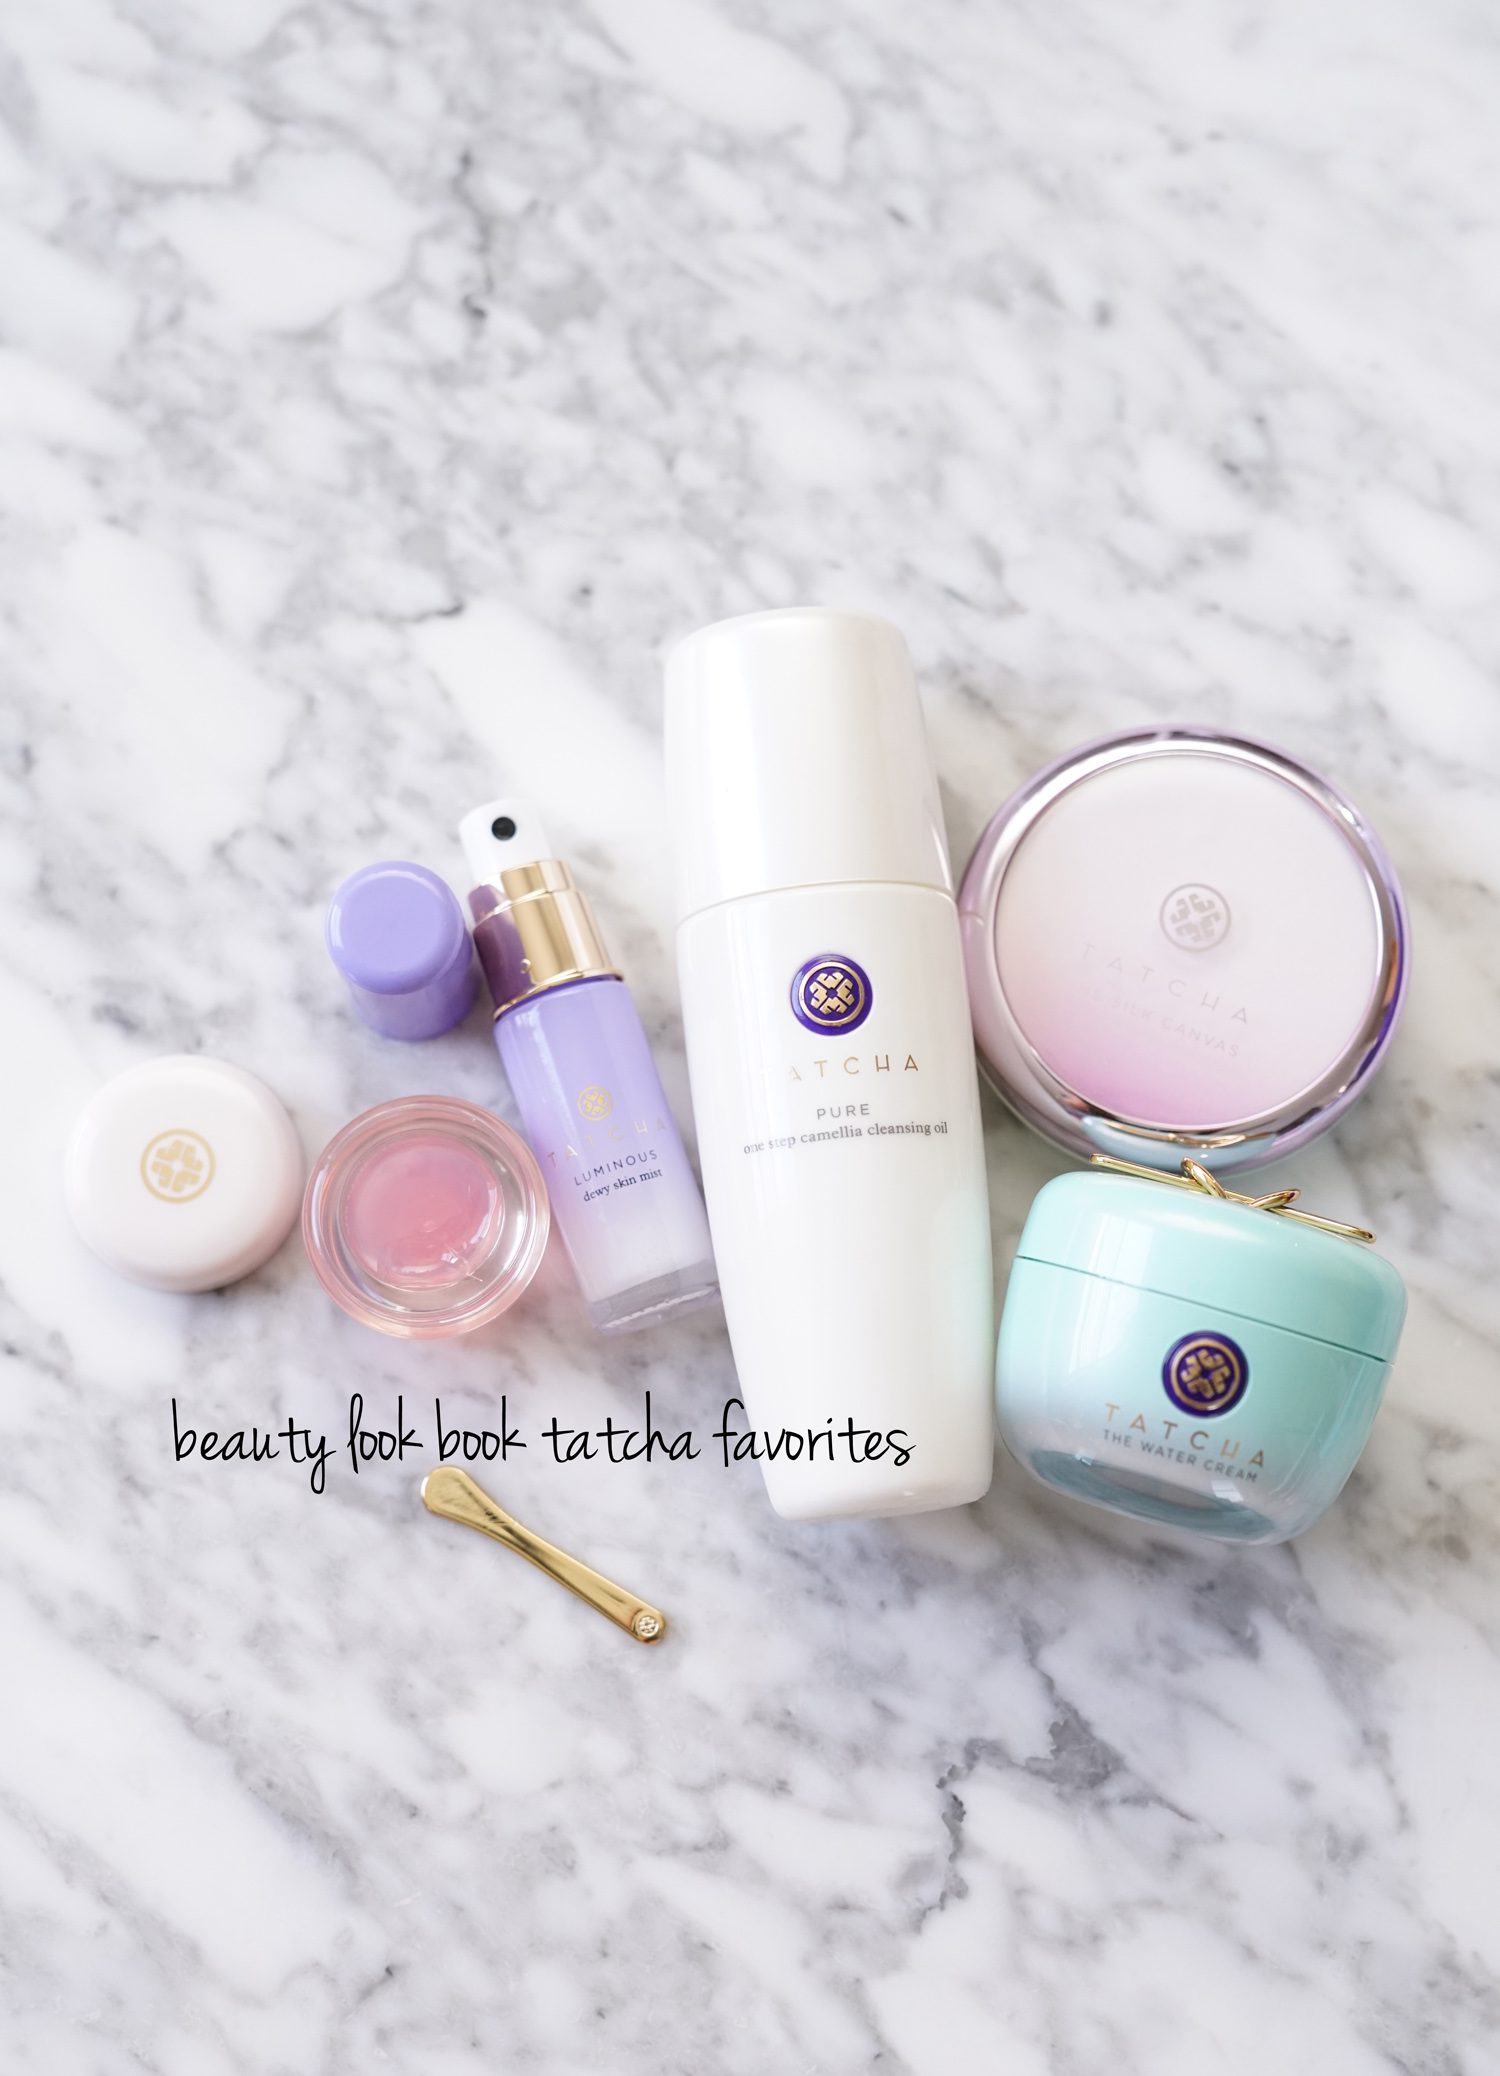 Tatcha Archives The Beauty Look Book